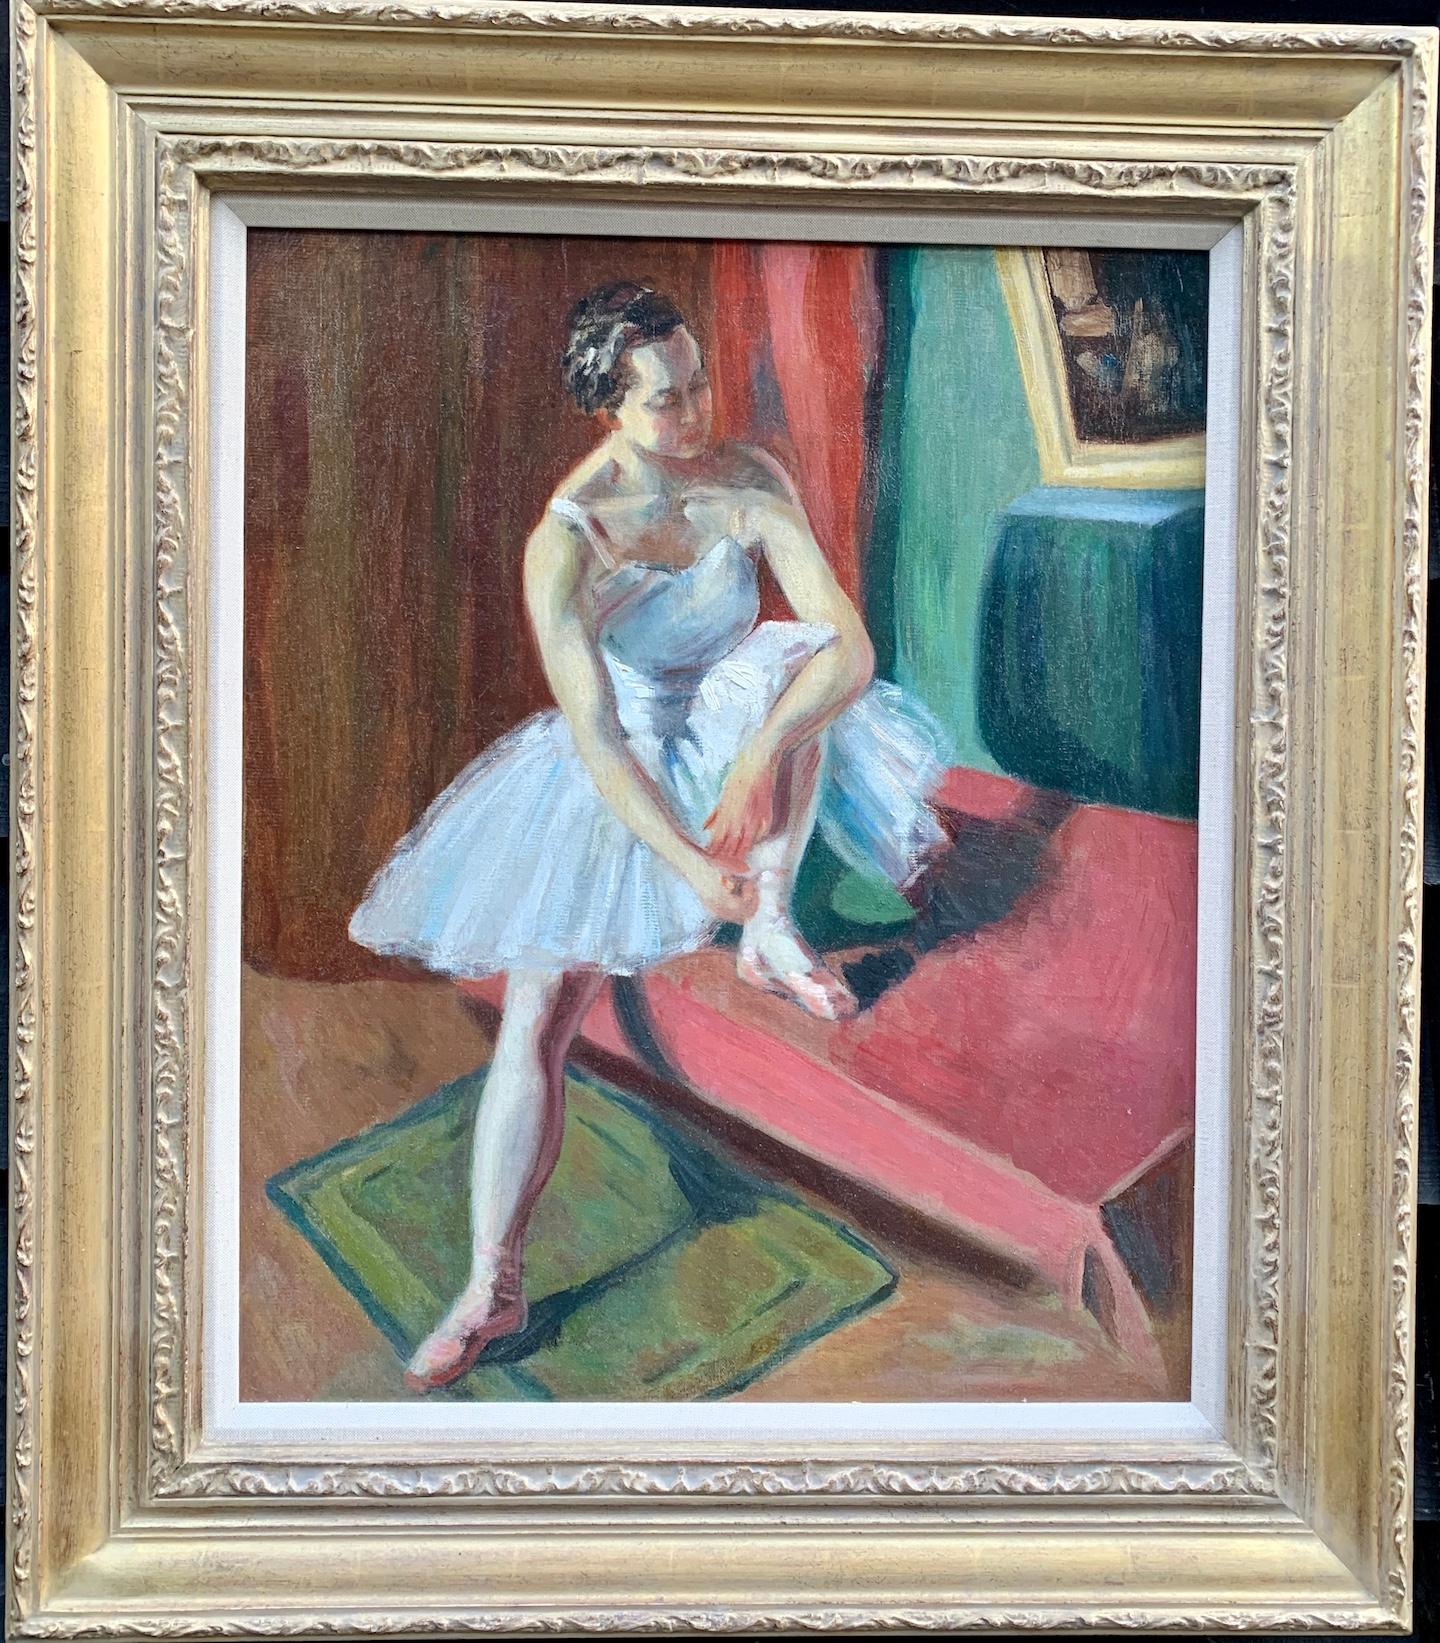 Impressionist French School Figurative Painting - Early 20th century French oil, seated ballerina adjusting her ballet slipper.